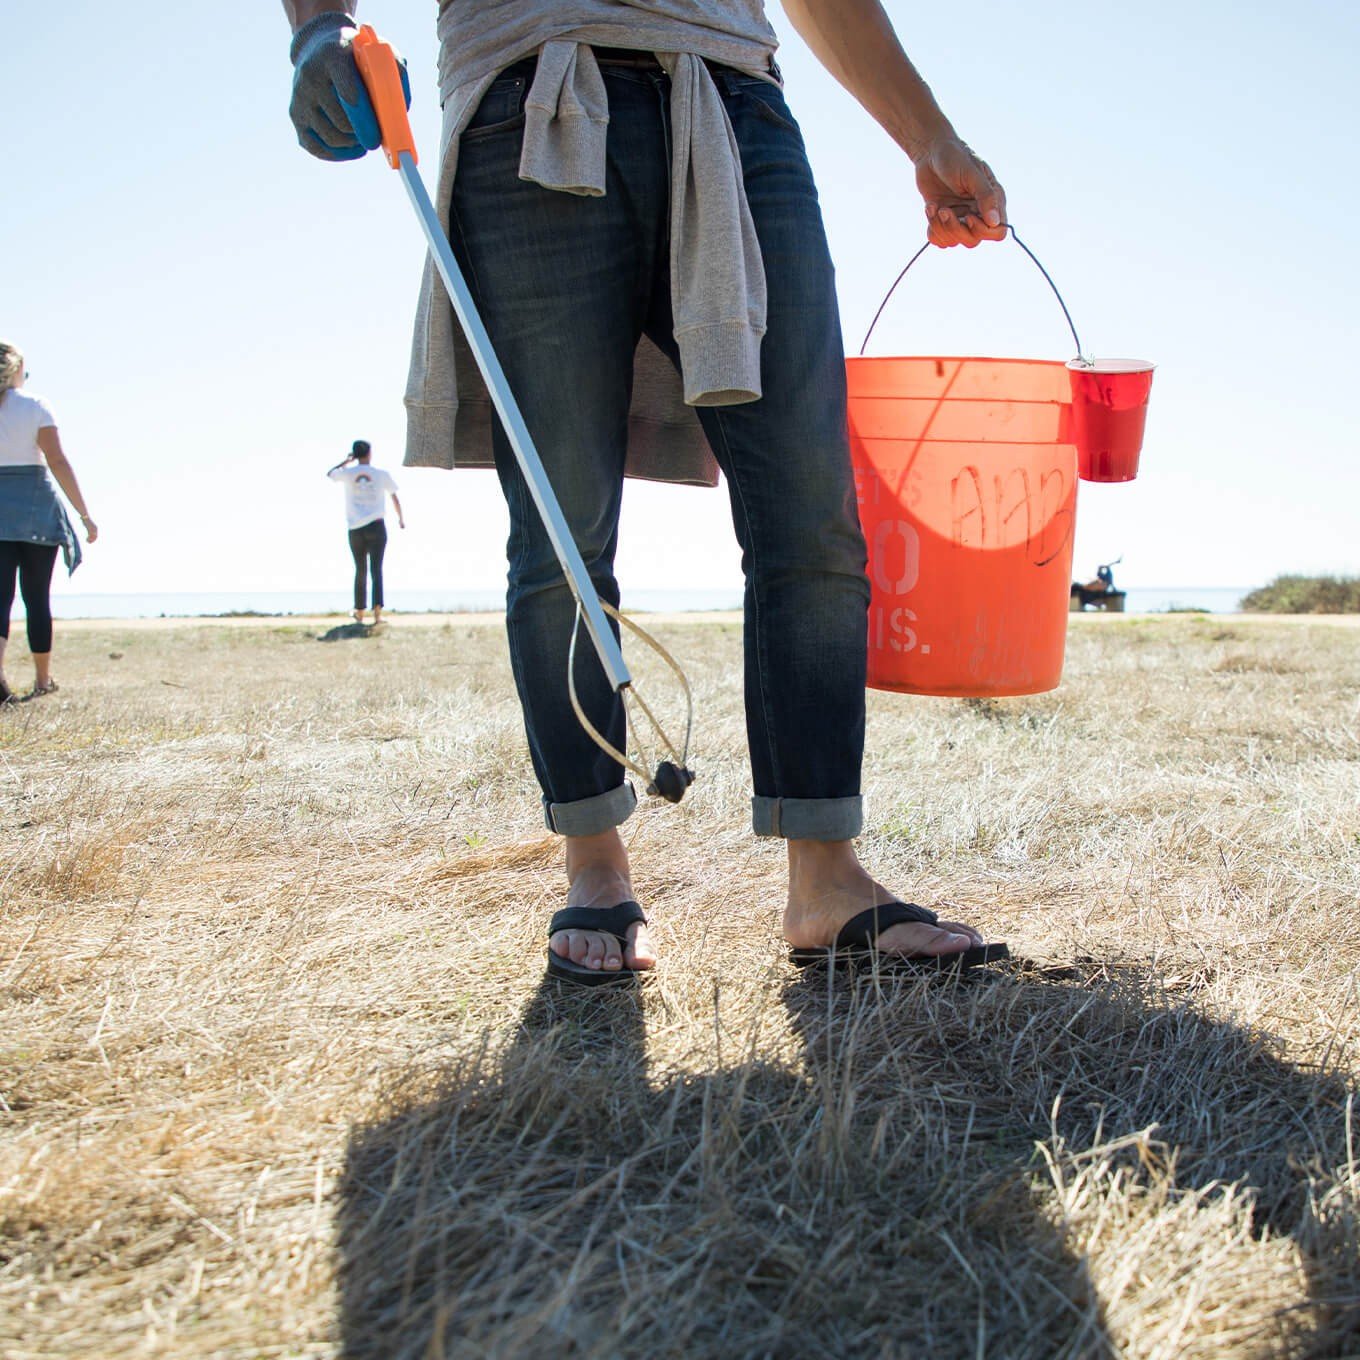 A volunteer uses a bucket and grabber to collect beachside litter.